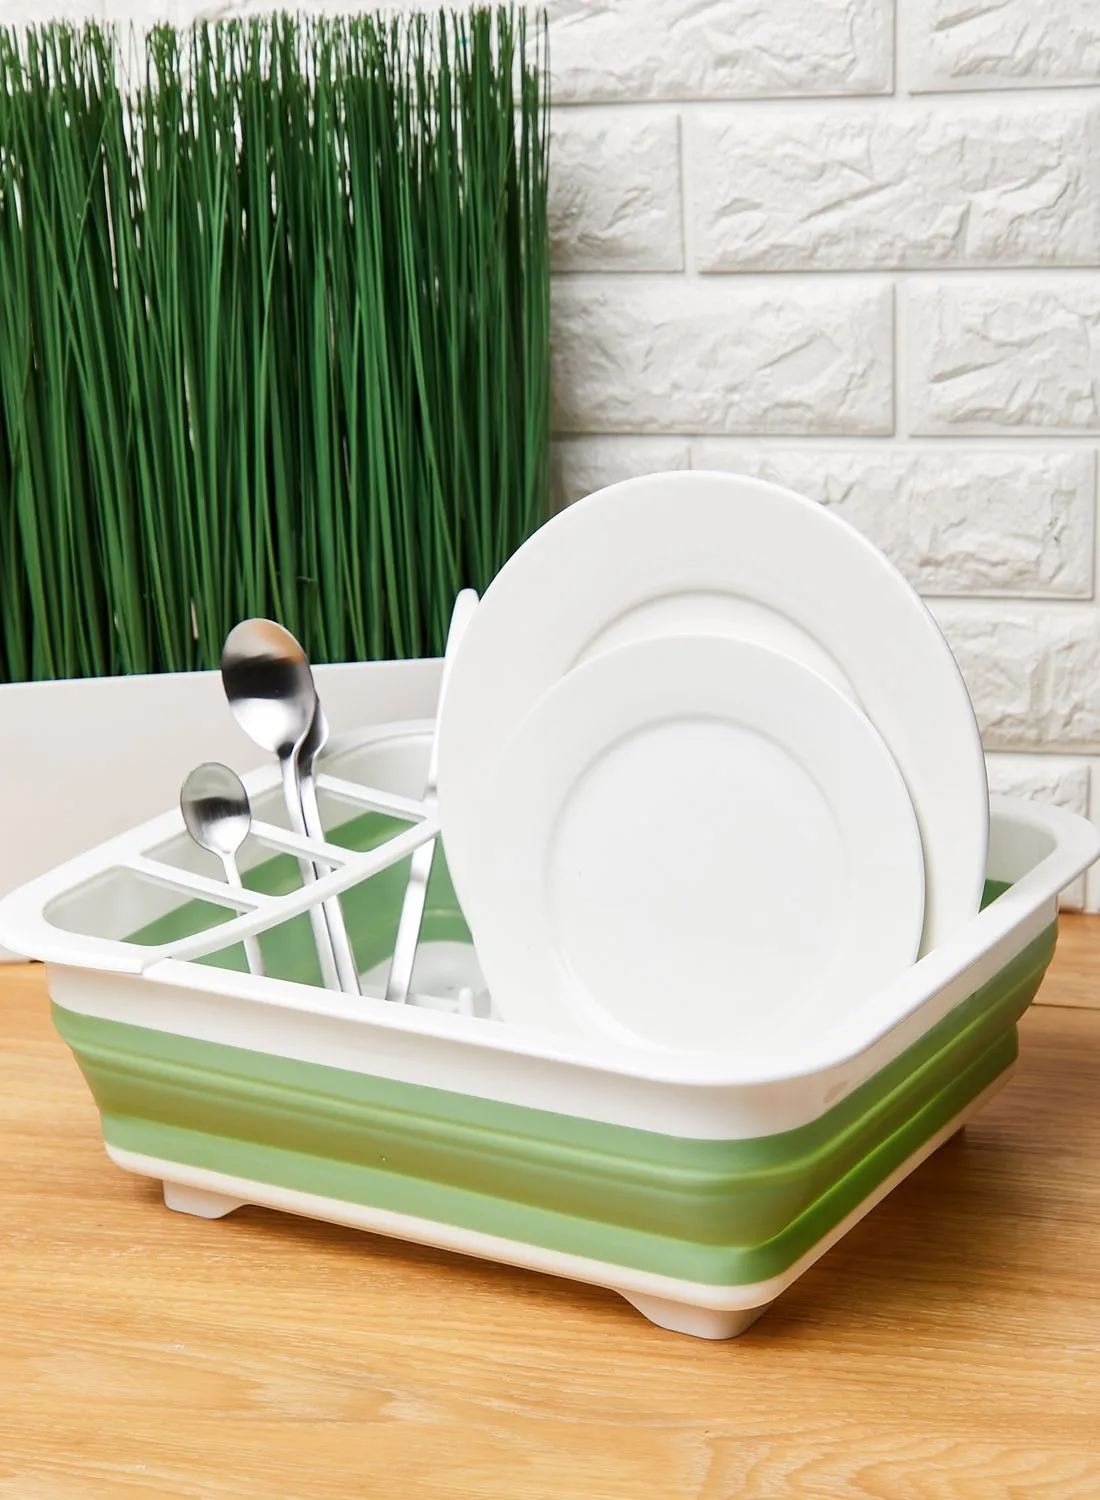 Premier Green Collapsible Dish Rack